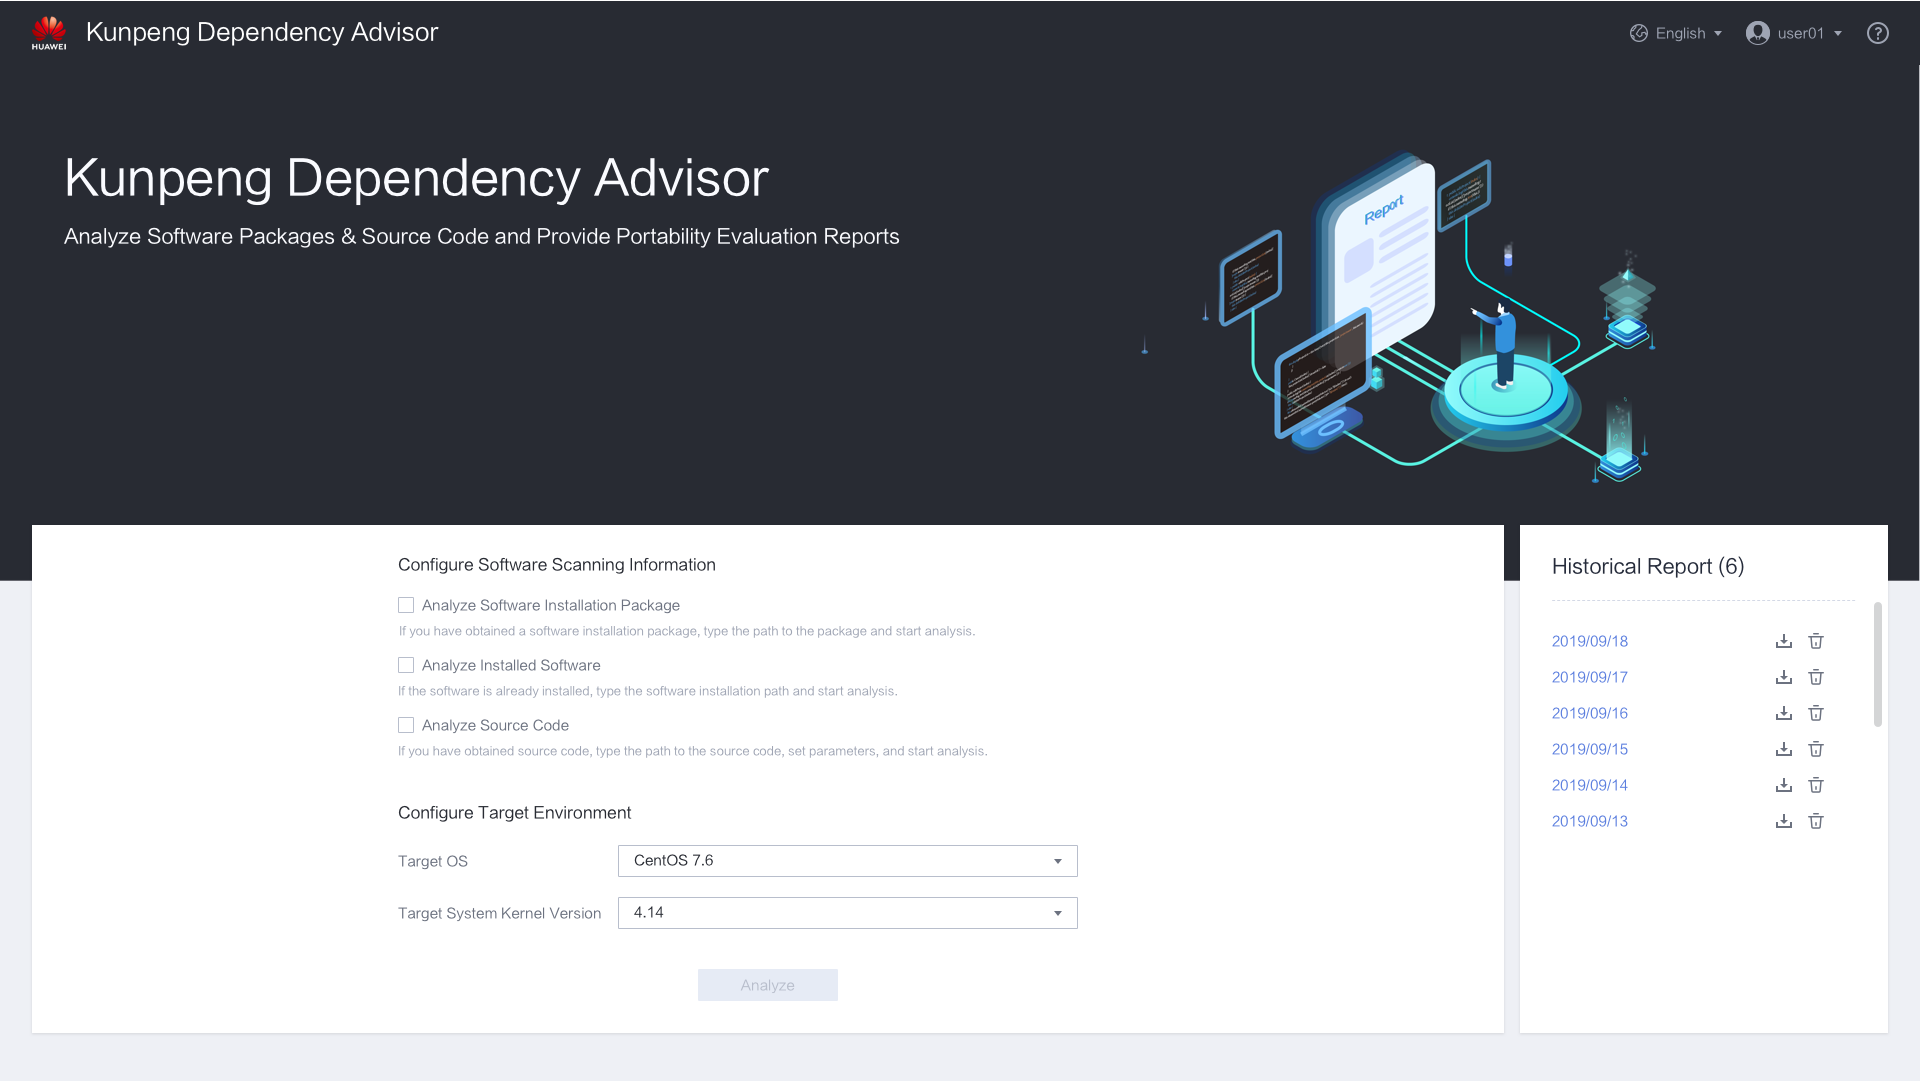 Kunpeng Dependency Advisor UI to analyze software packages and source code, and provide portability evaluation reports